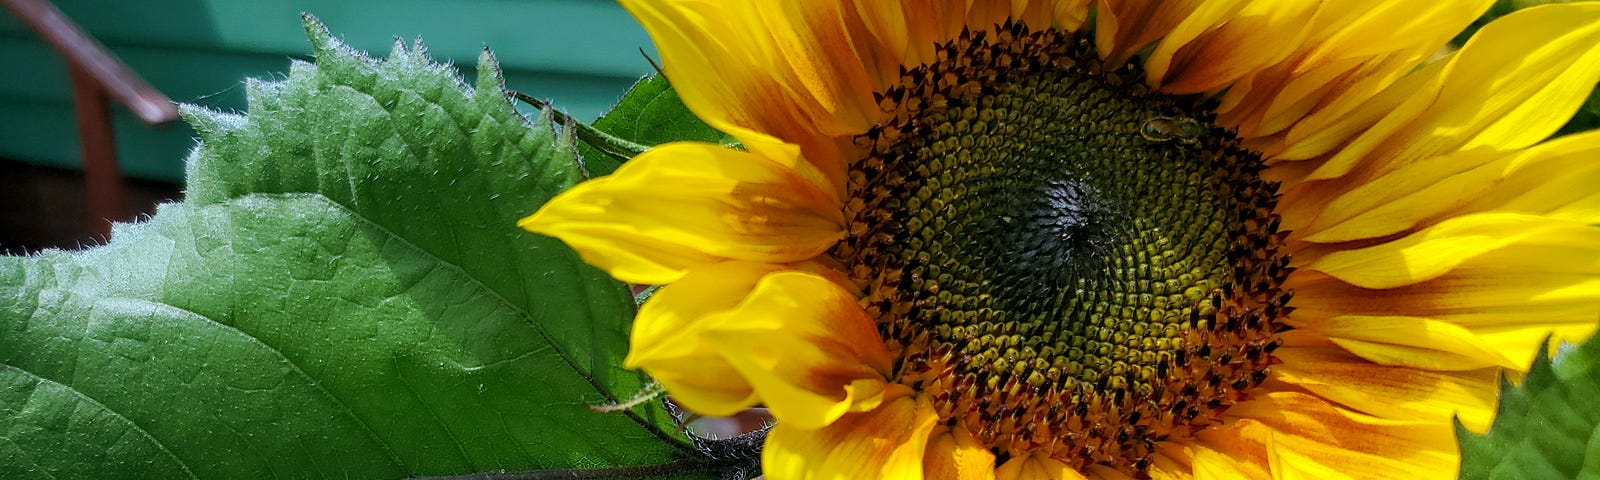 A sunflower with yellow and reddish petals and a red ring around the yellow-brown middle with a small pollinator insect in the upper right of the center. Behind the sunflower are the large green leaves and stem of the flower.